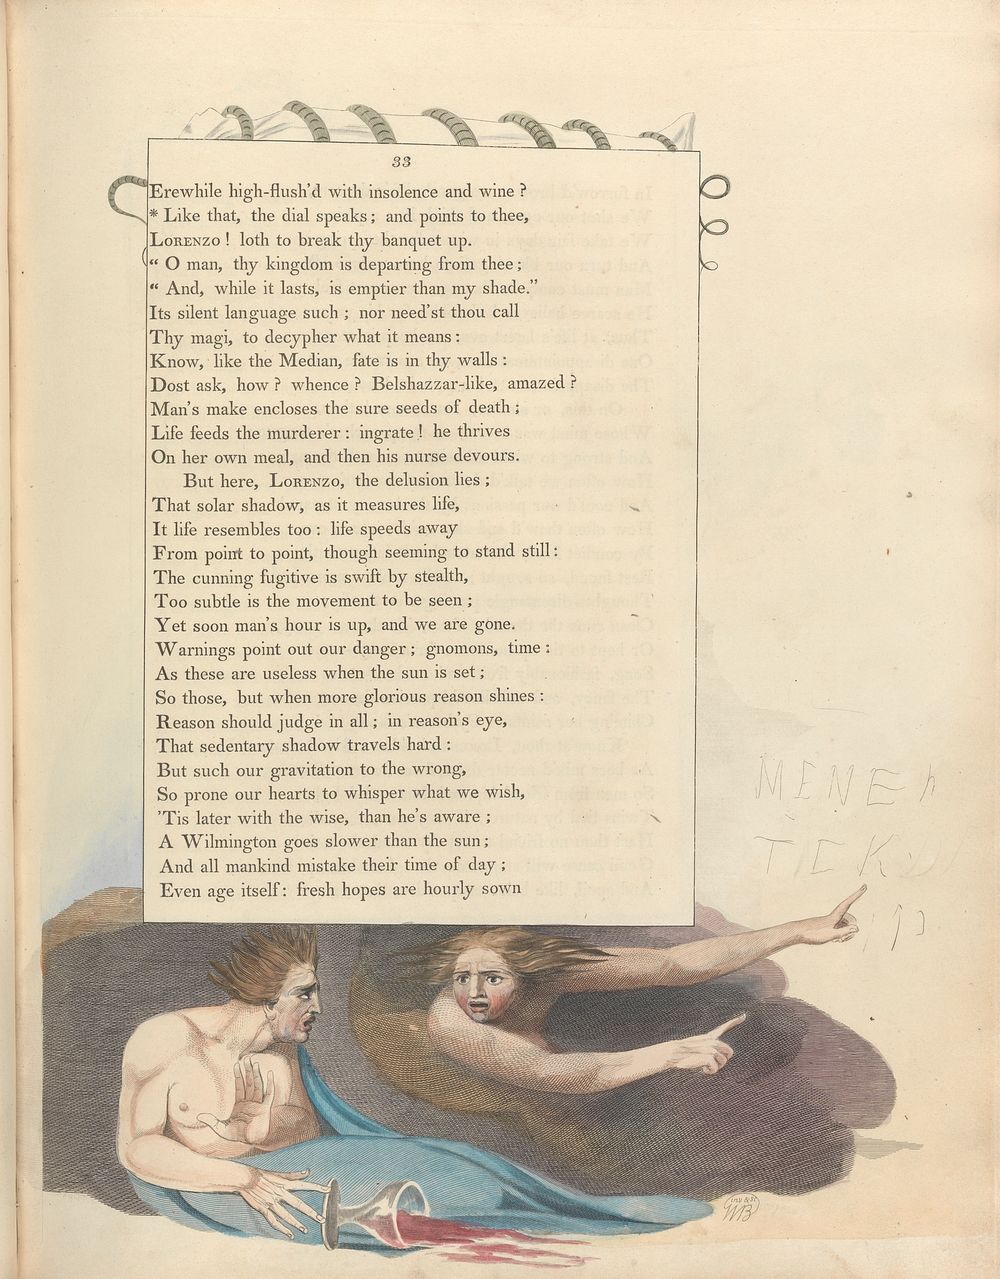 Young's Night Thoughts, Page 33, "Like that, the dial speaks; and points to thee" by William Blake.